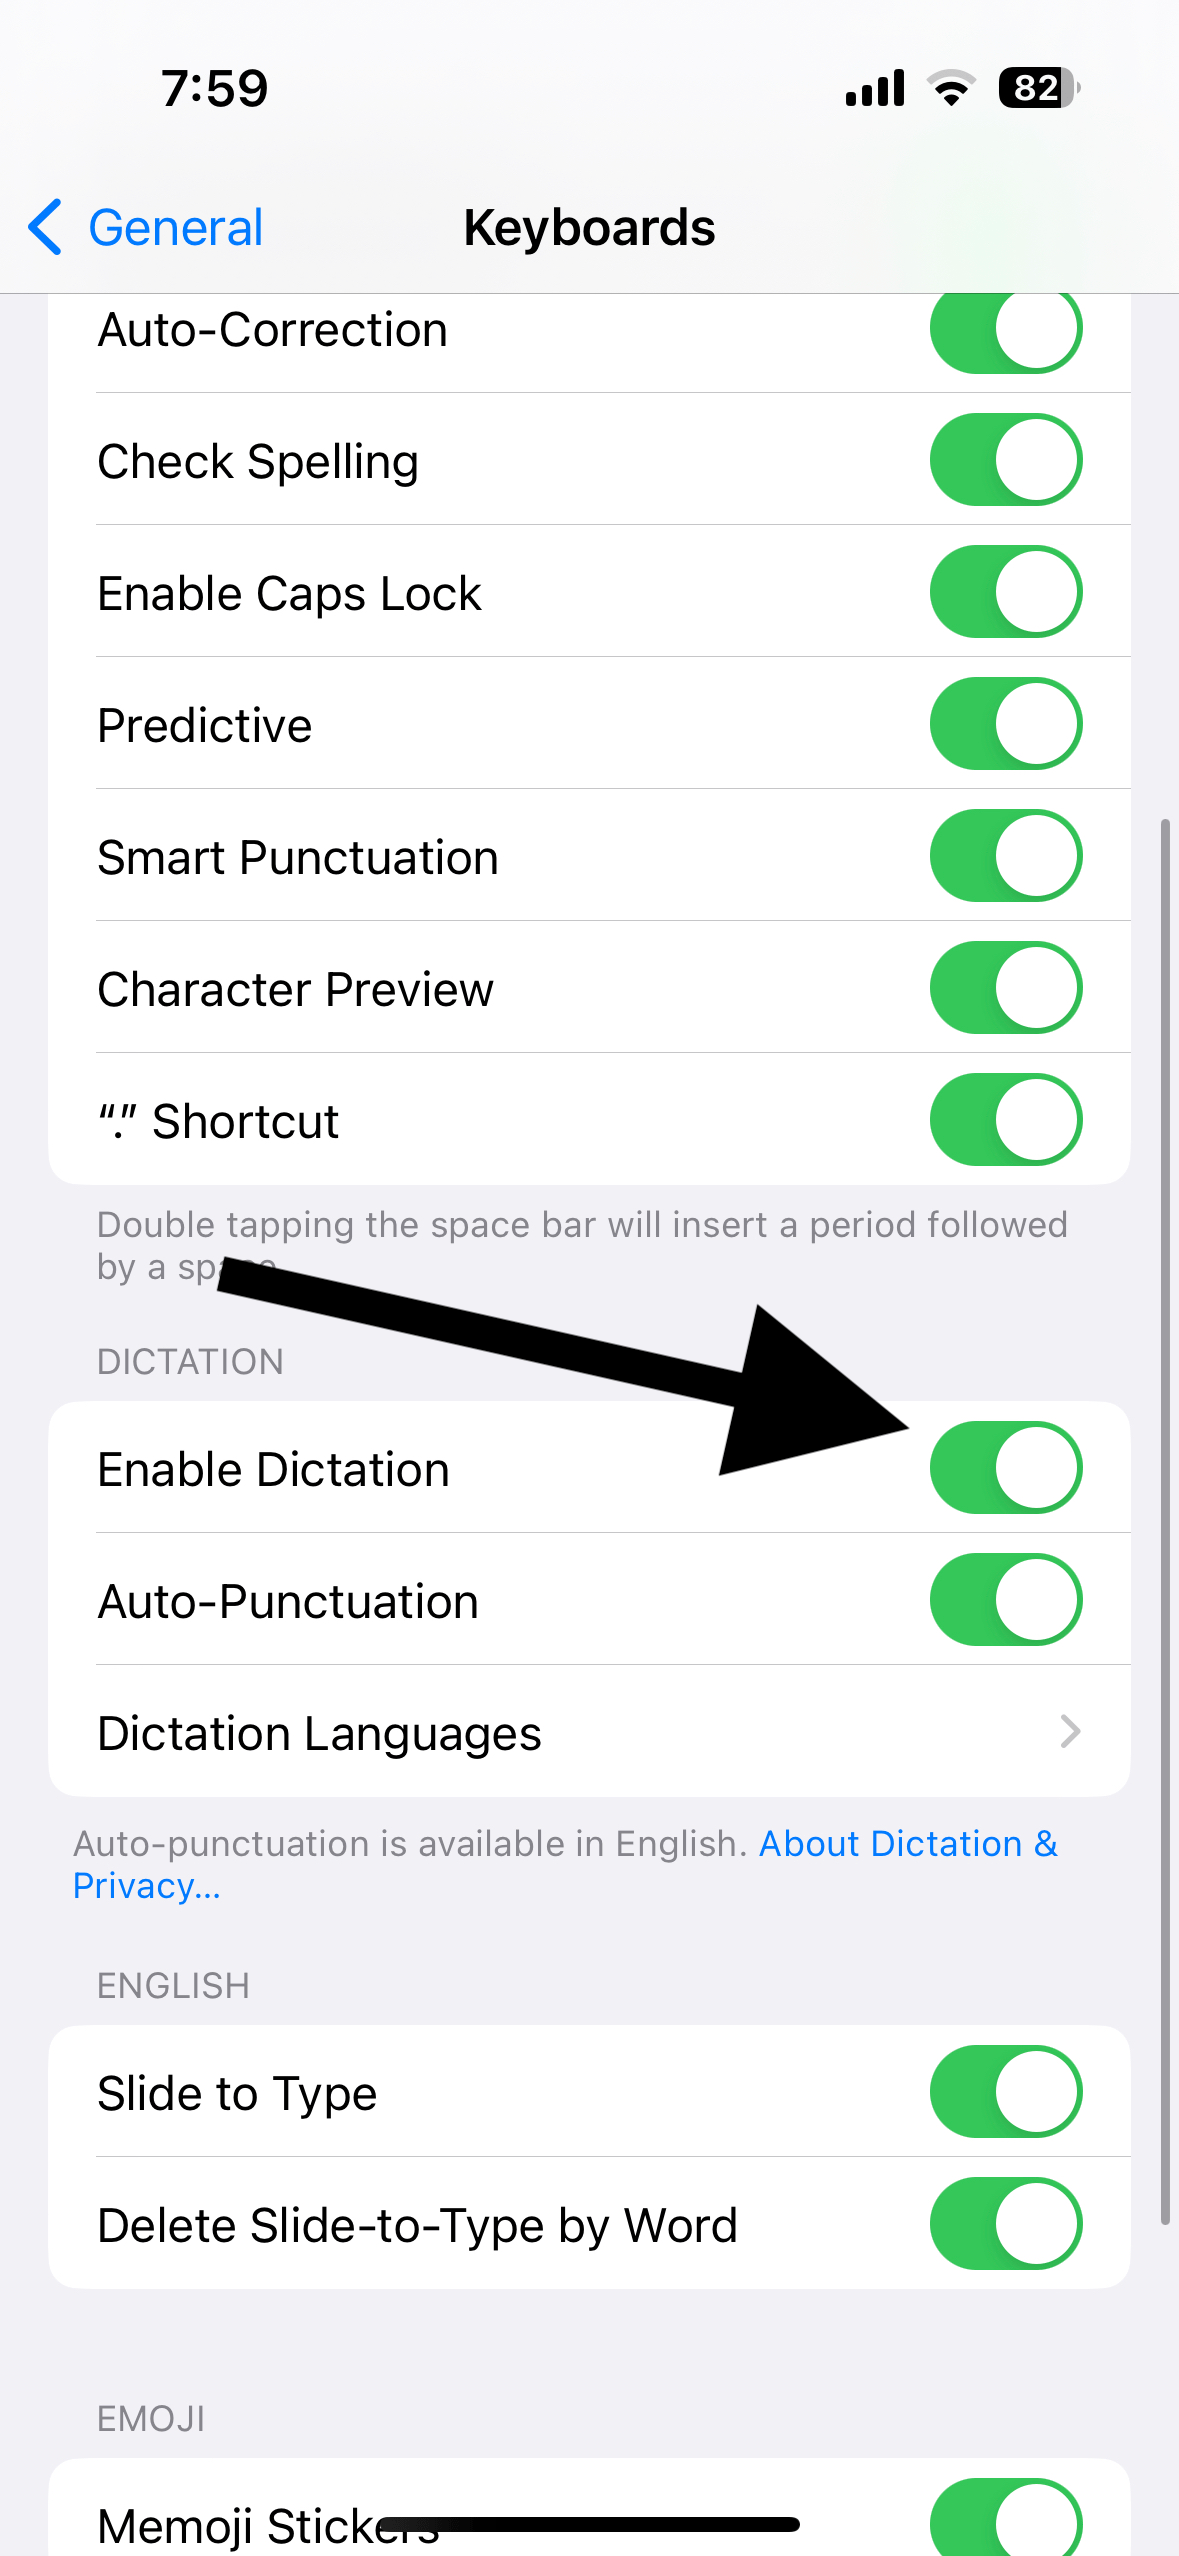 Enable Dictation